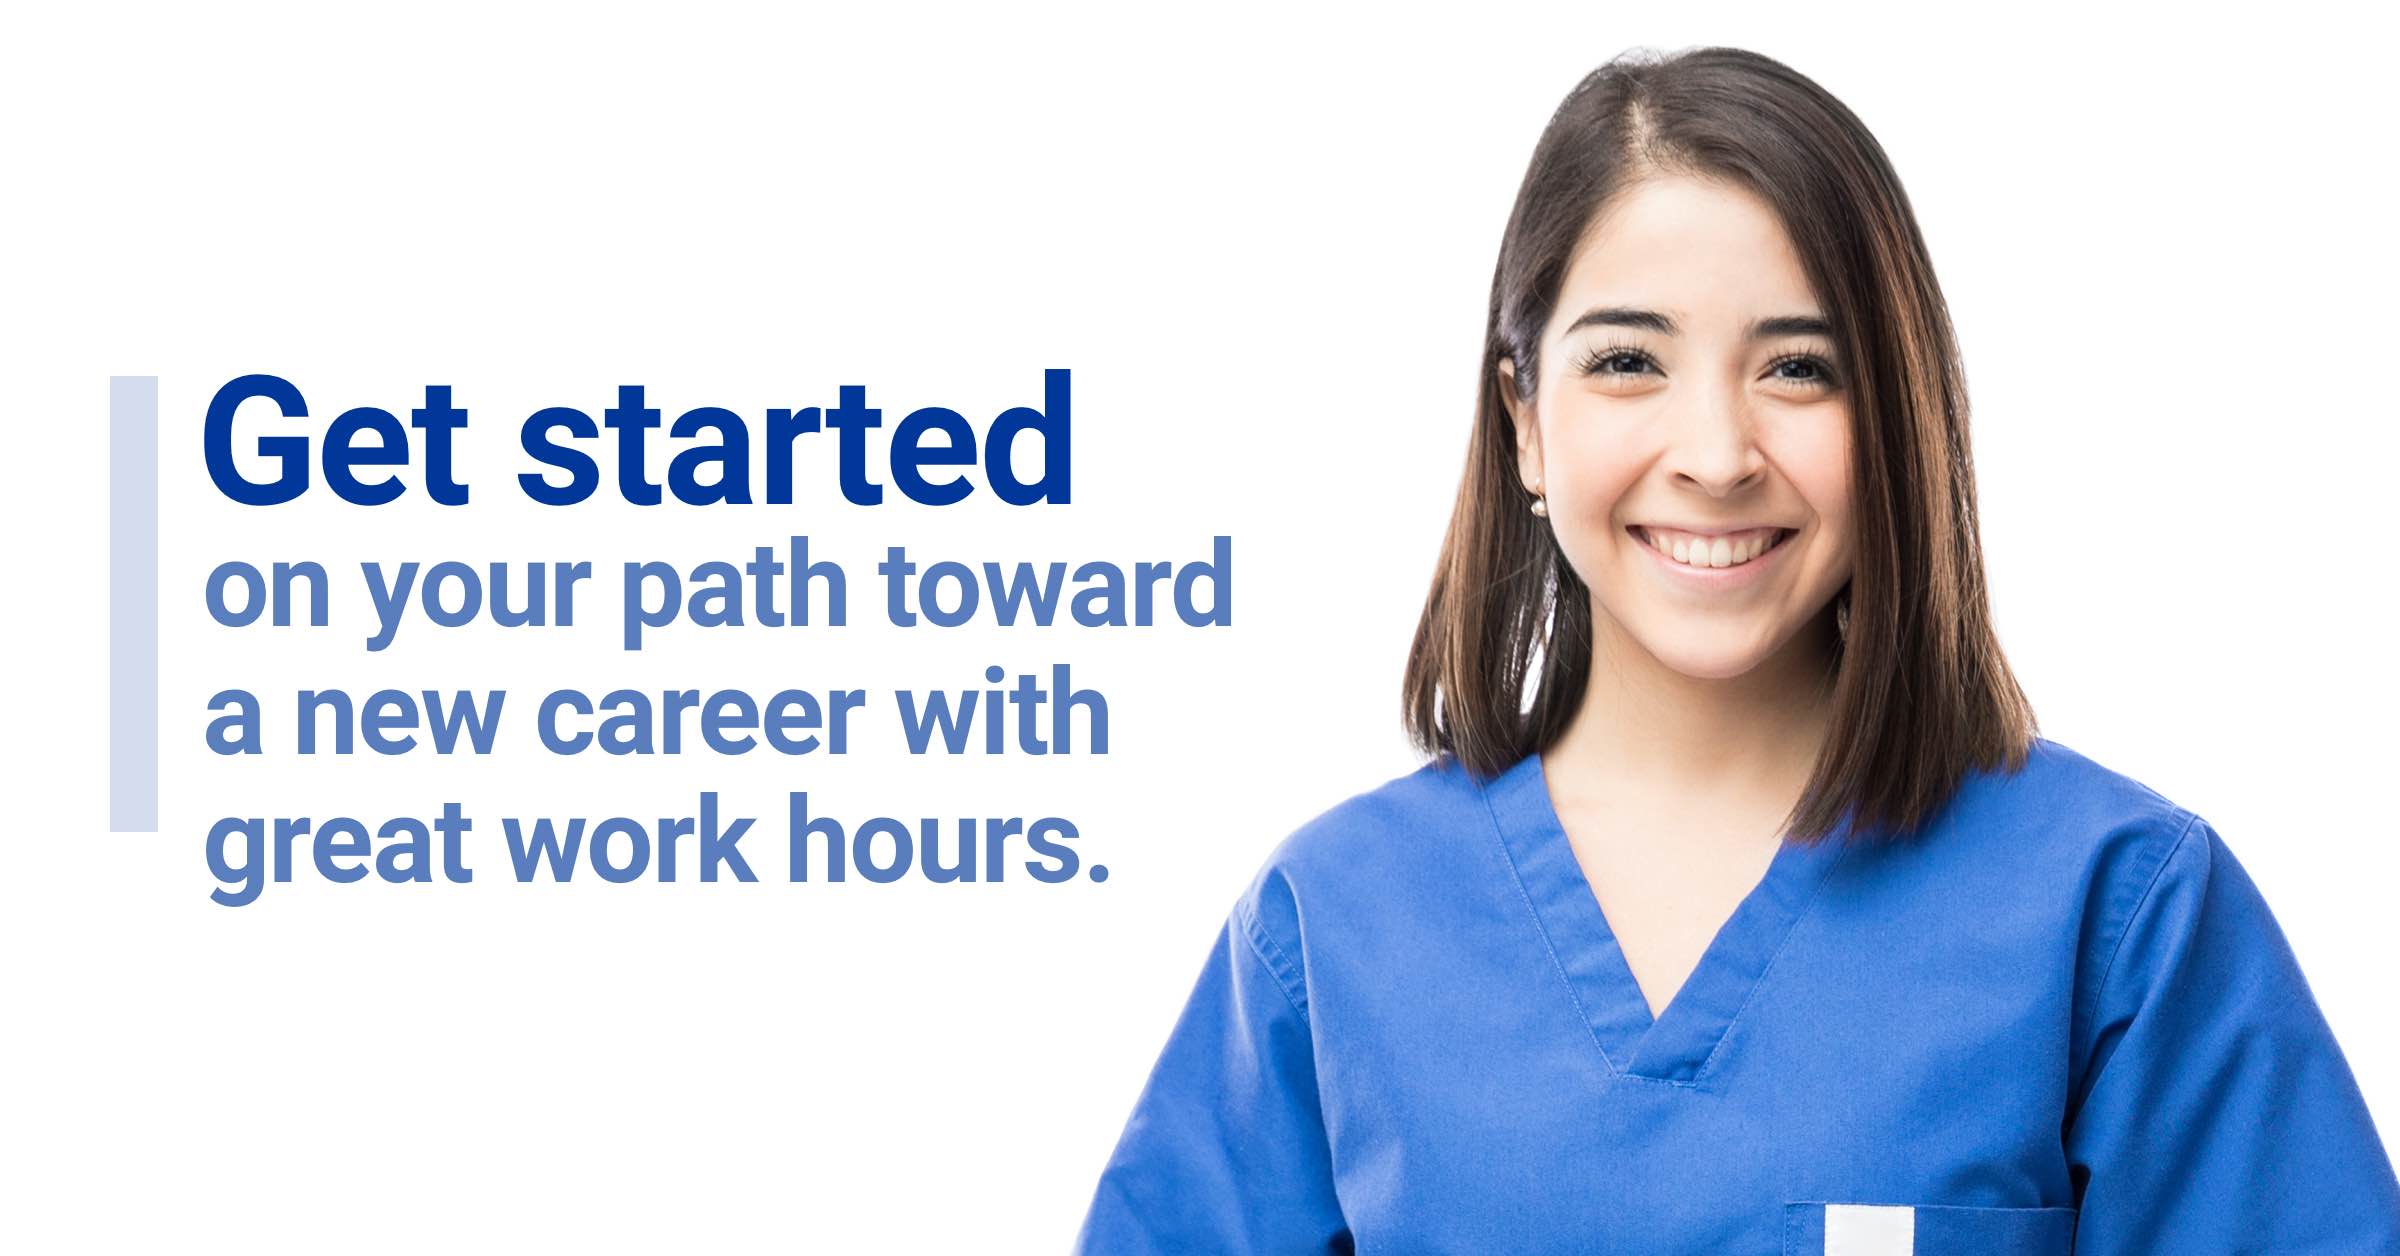 Get started on your path toward a new career with great work hours.